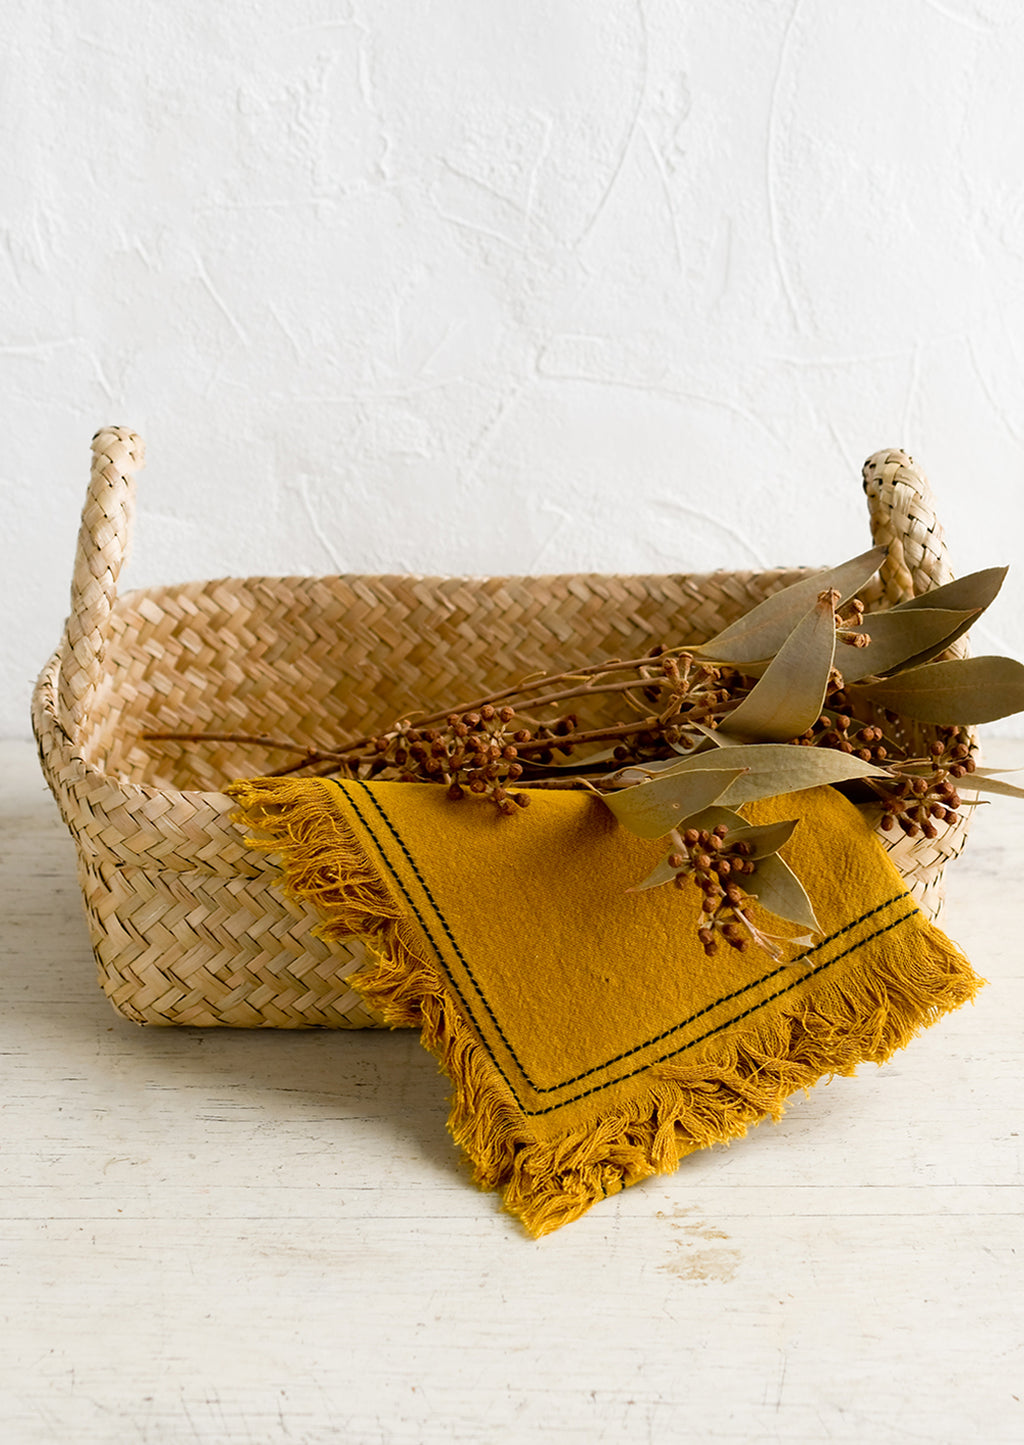 2: A rectangular seagrass basket with rolled top rim and side handles.